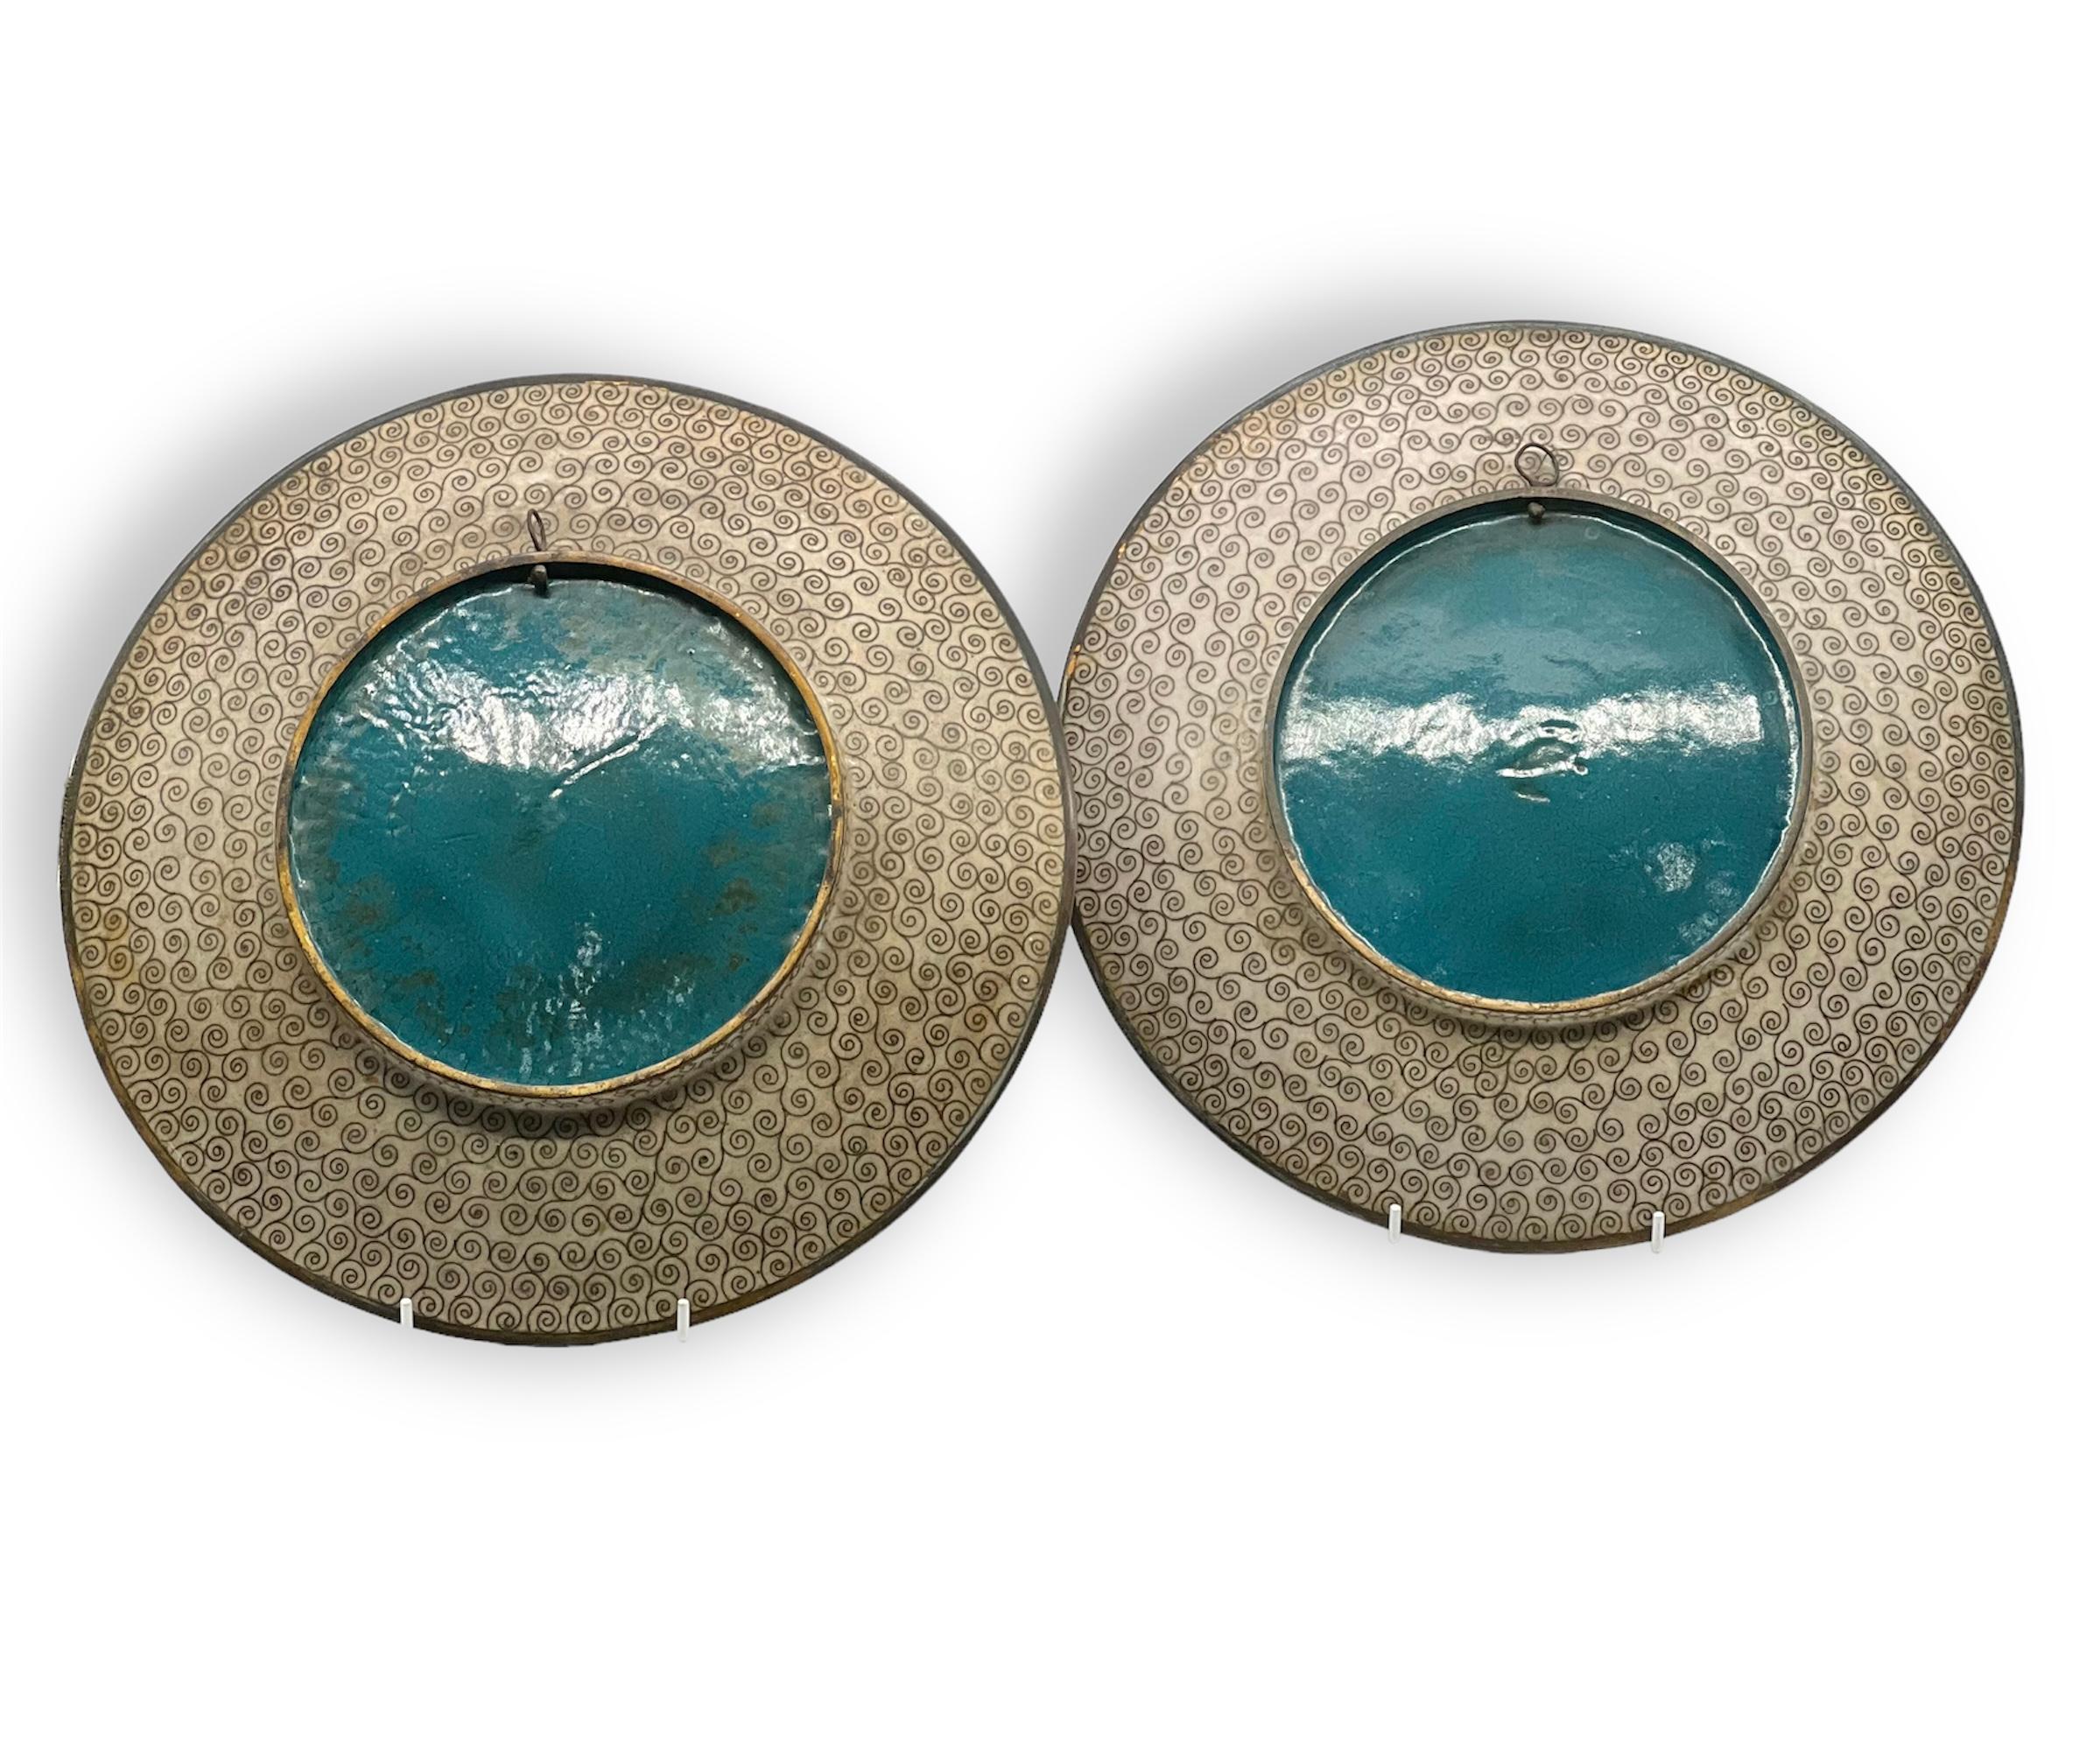 Enamel Exquisite Pair of Japanese Cloisonne on Bronze Chargers, Meiji Period, 19th C